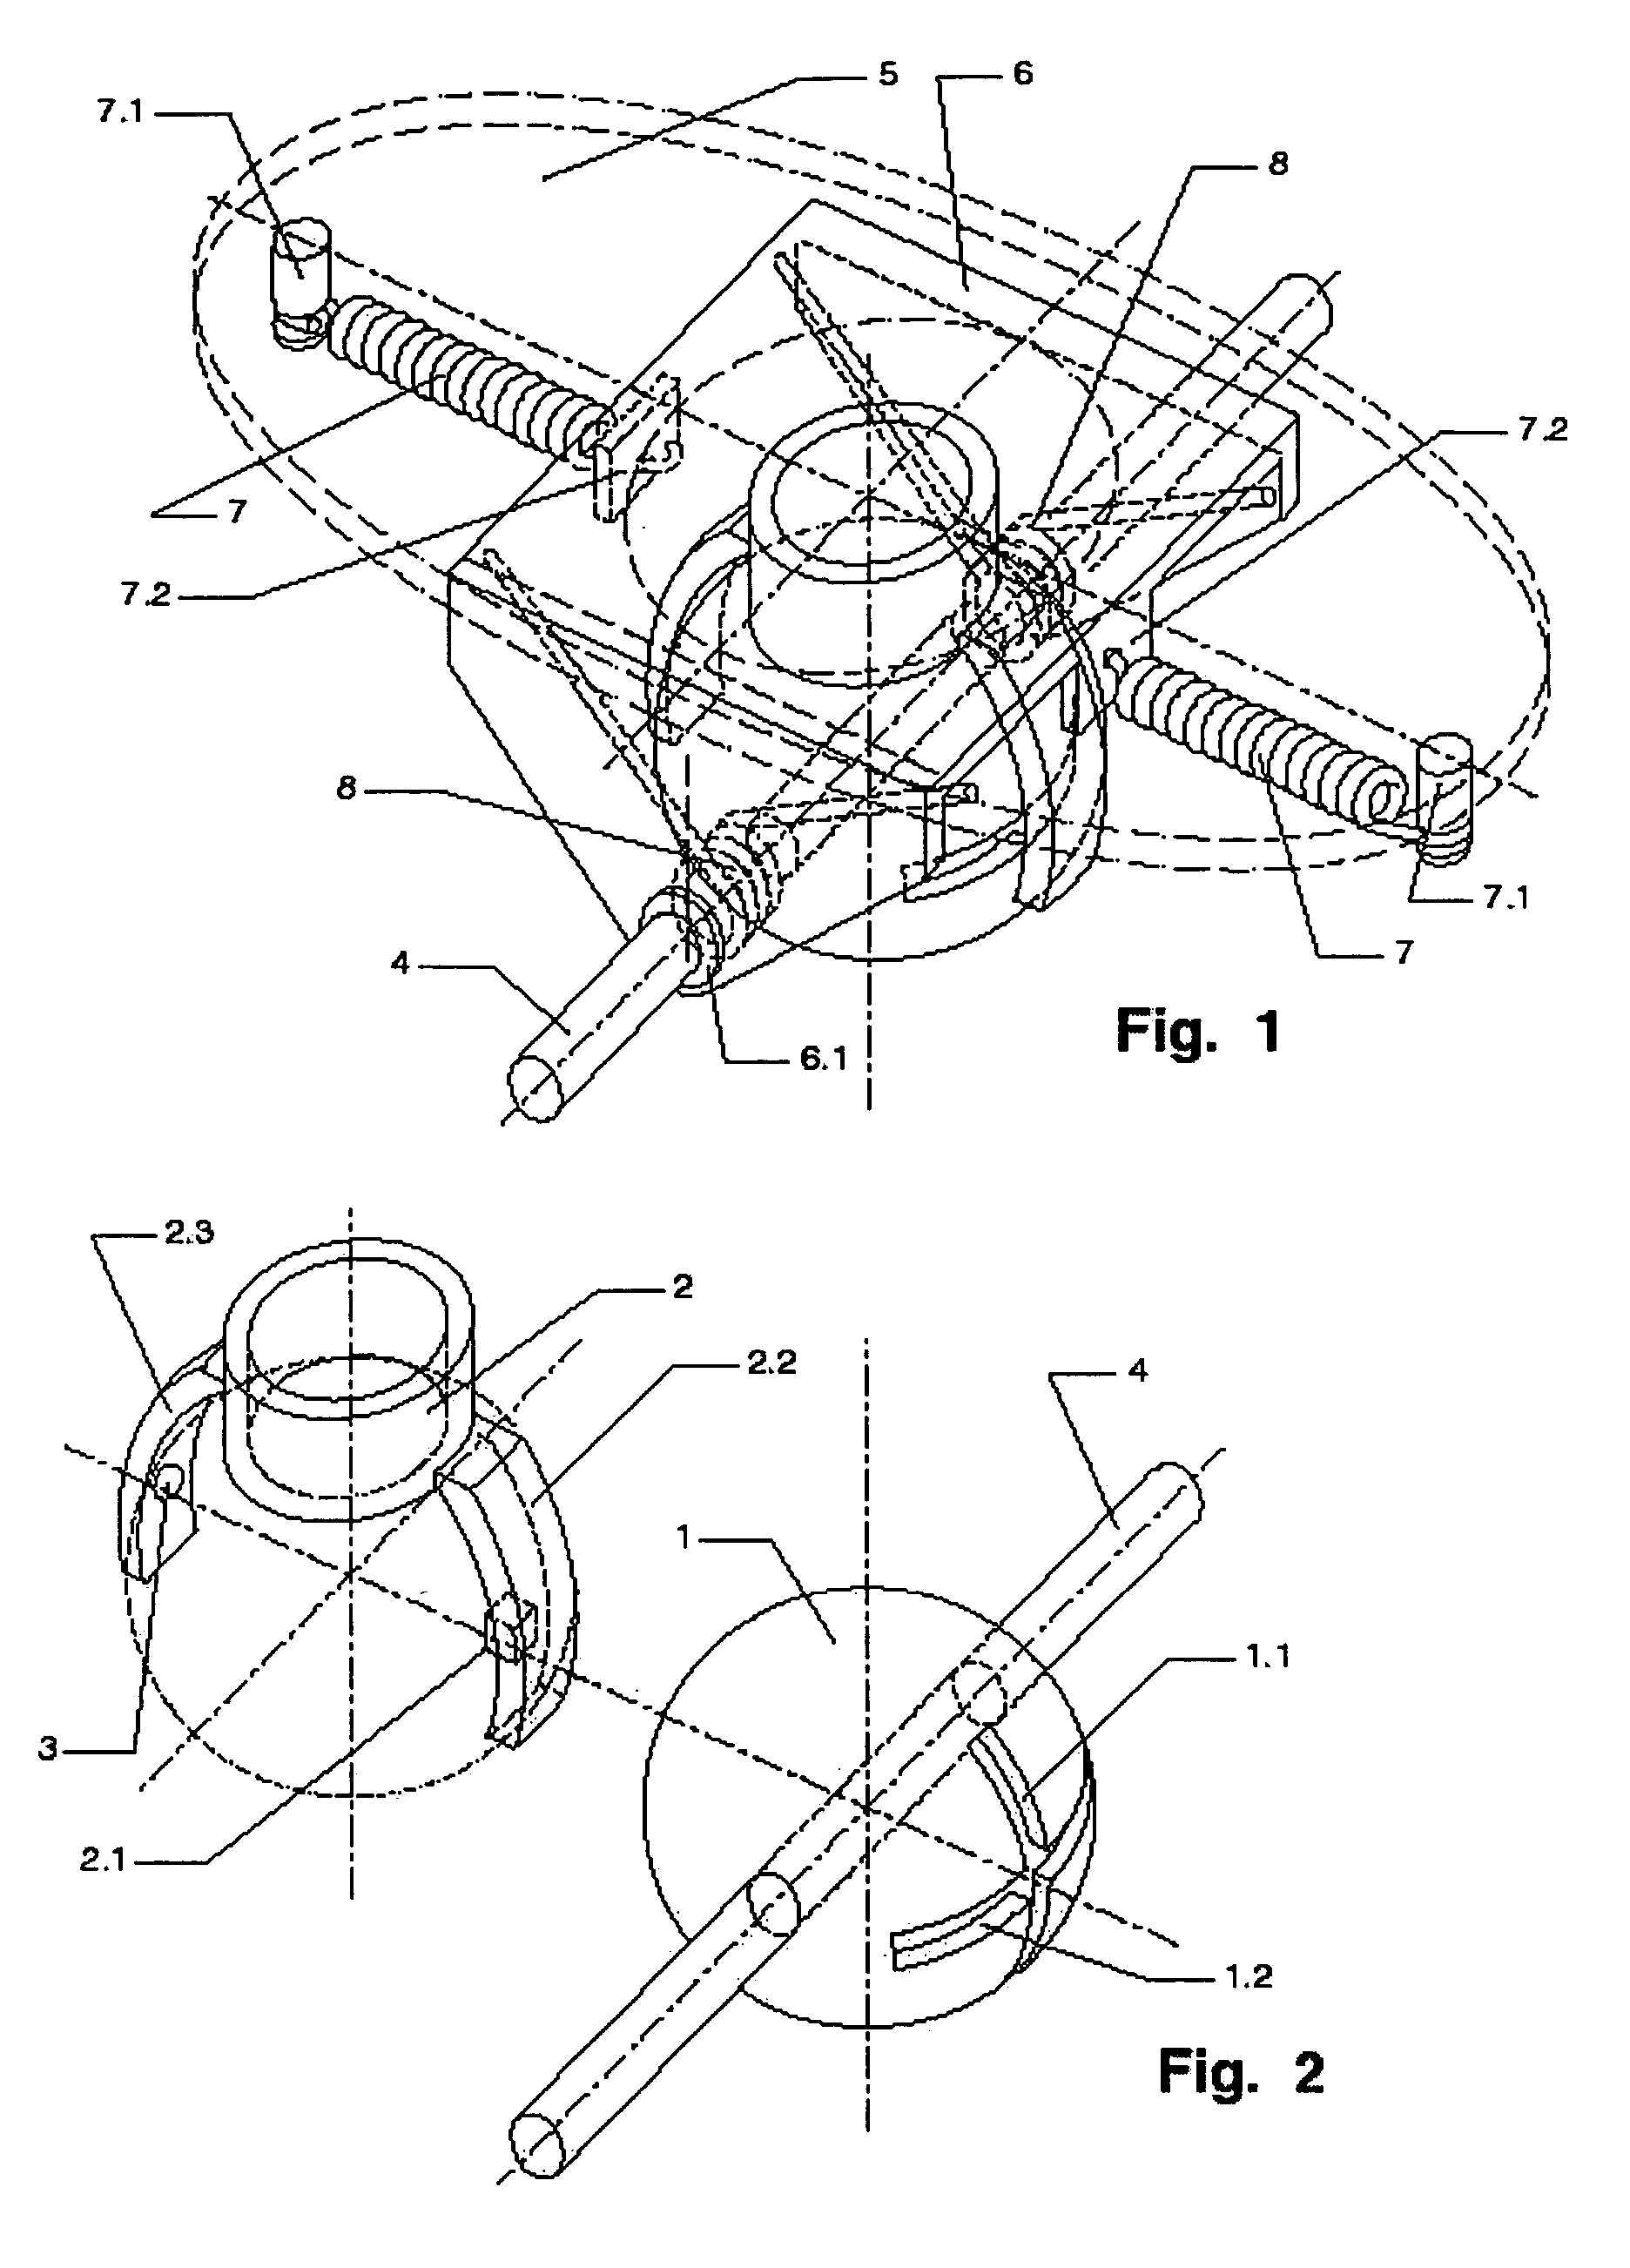 Mechanical device for performing single, orthogonal, alternate, and independent movements applicable to a gym apparatus